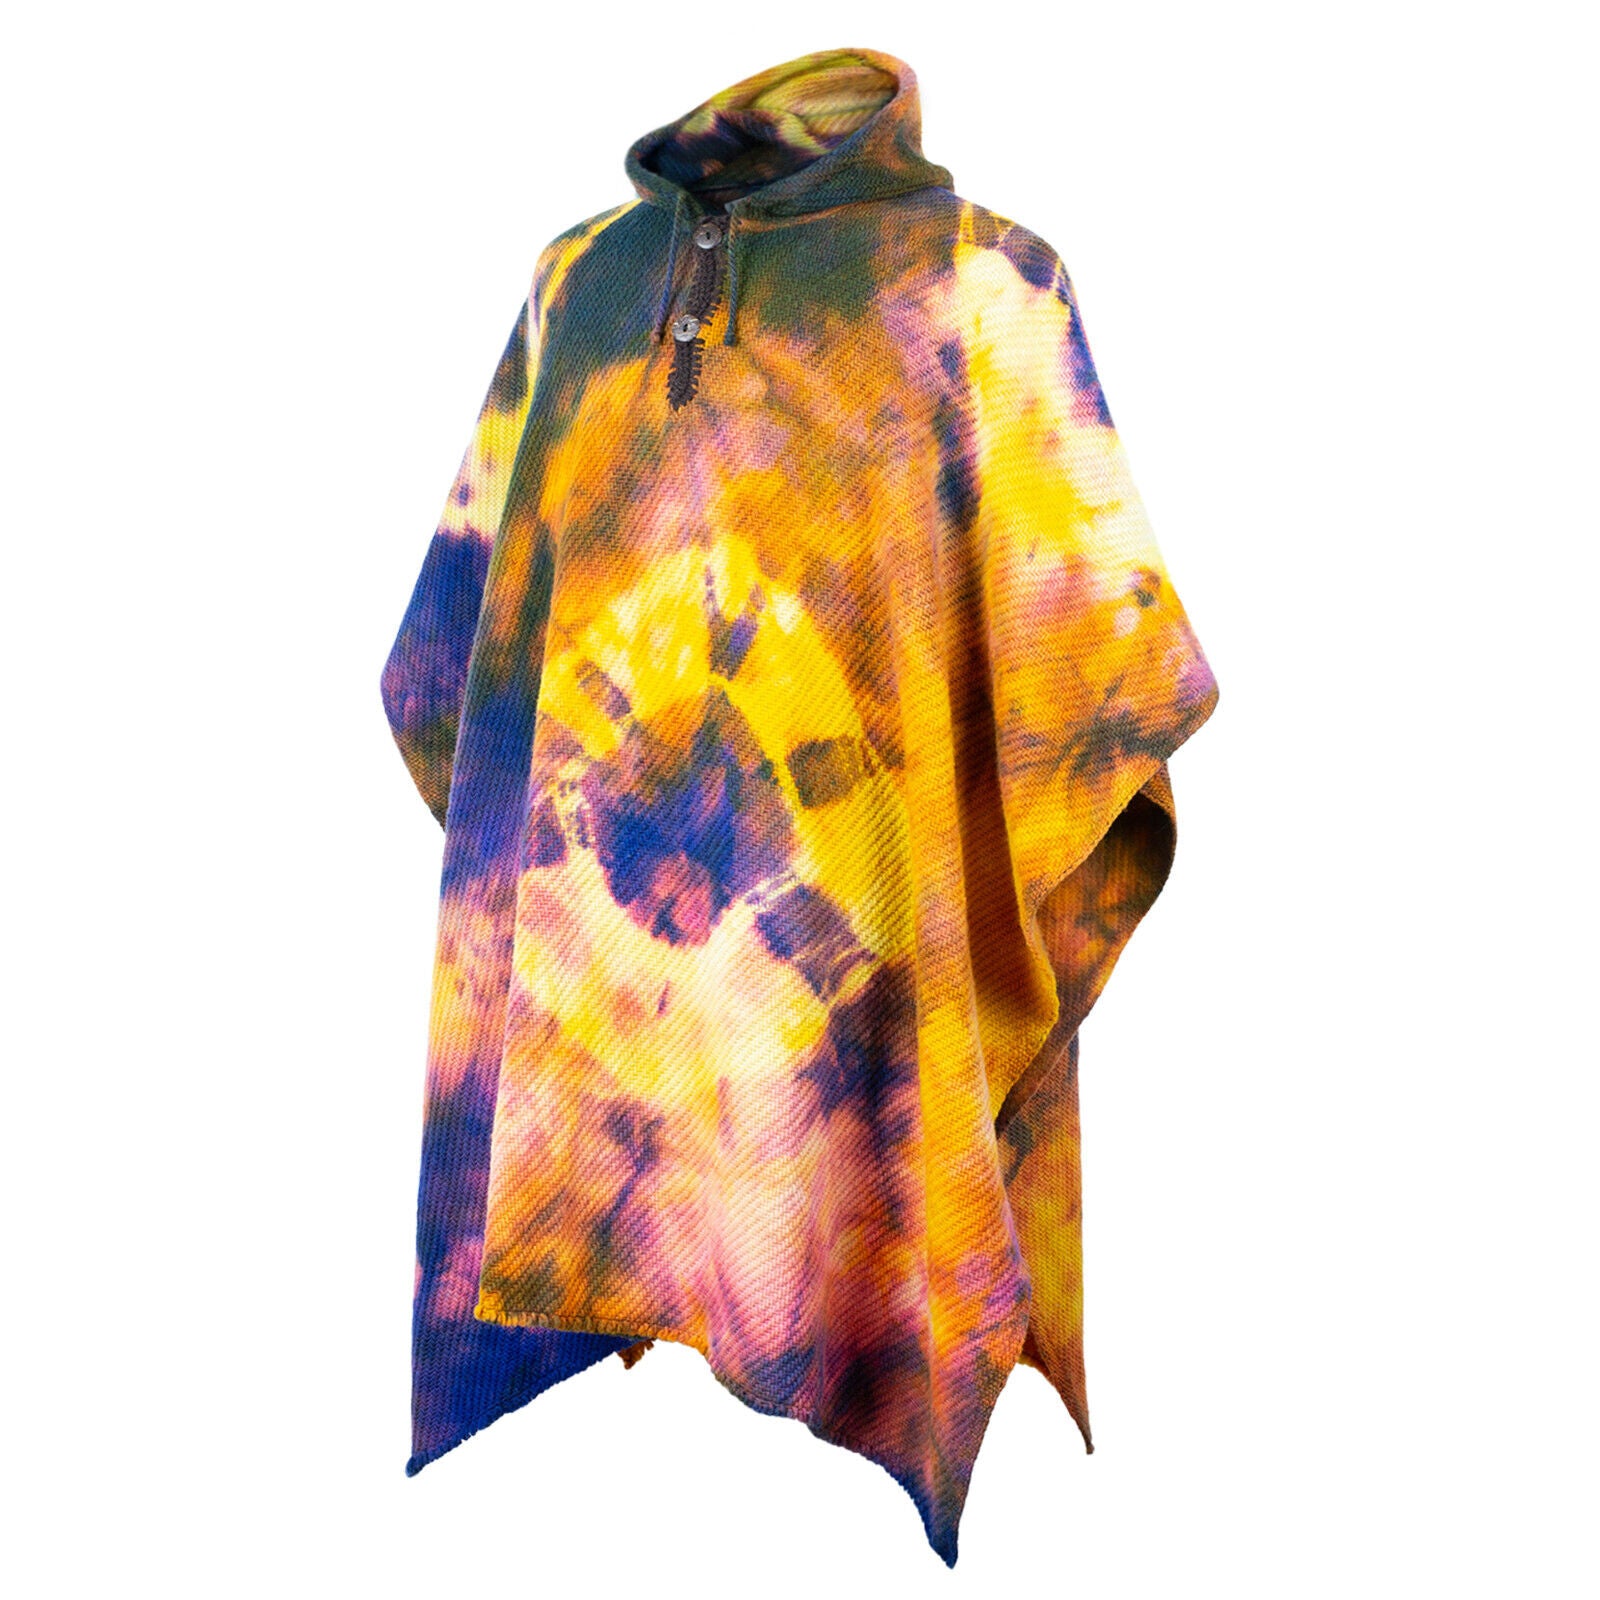 Llamacanche - Llama Wool Unisex South American Handwoven Hooded Poncho - blue/violet/yellow abstract pattern